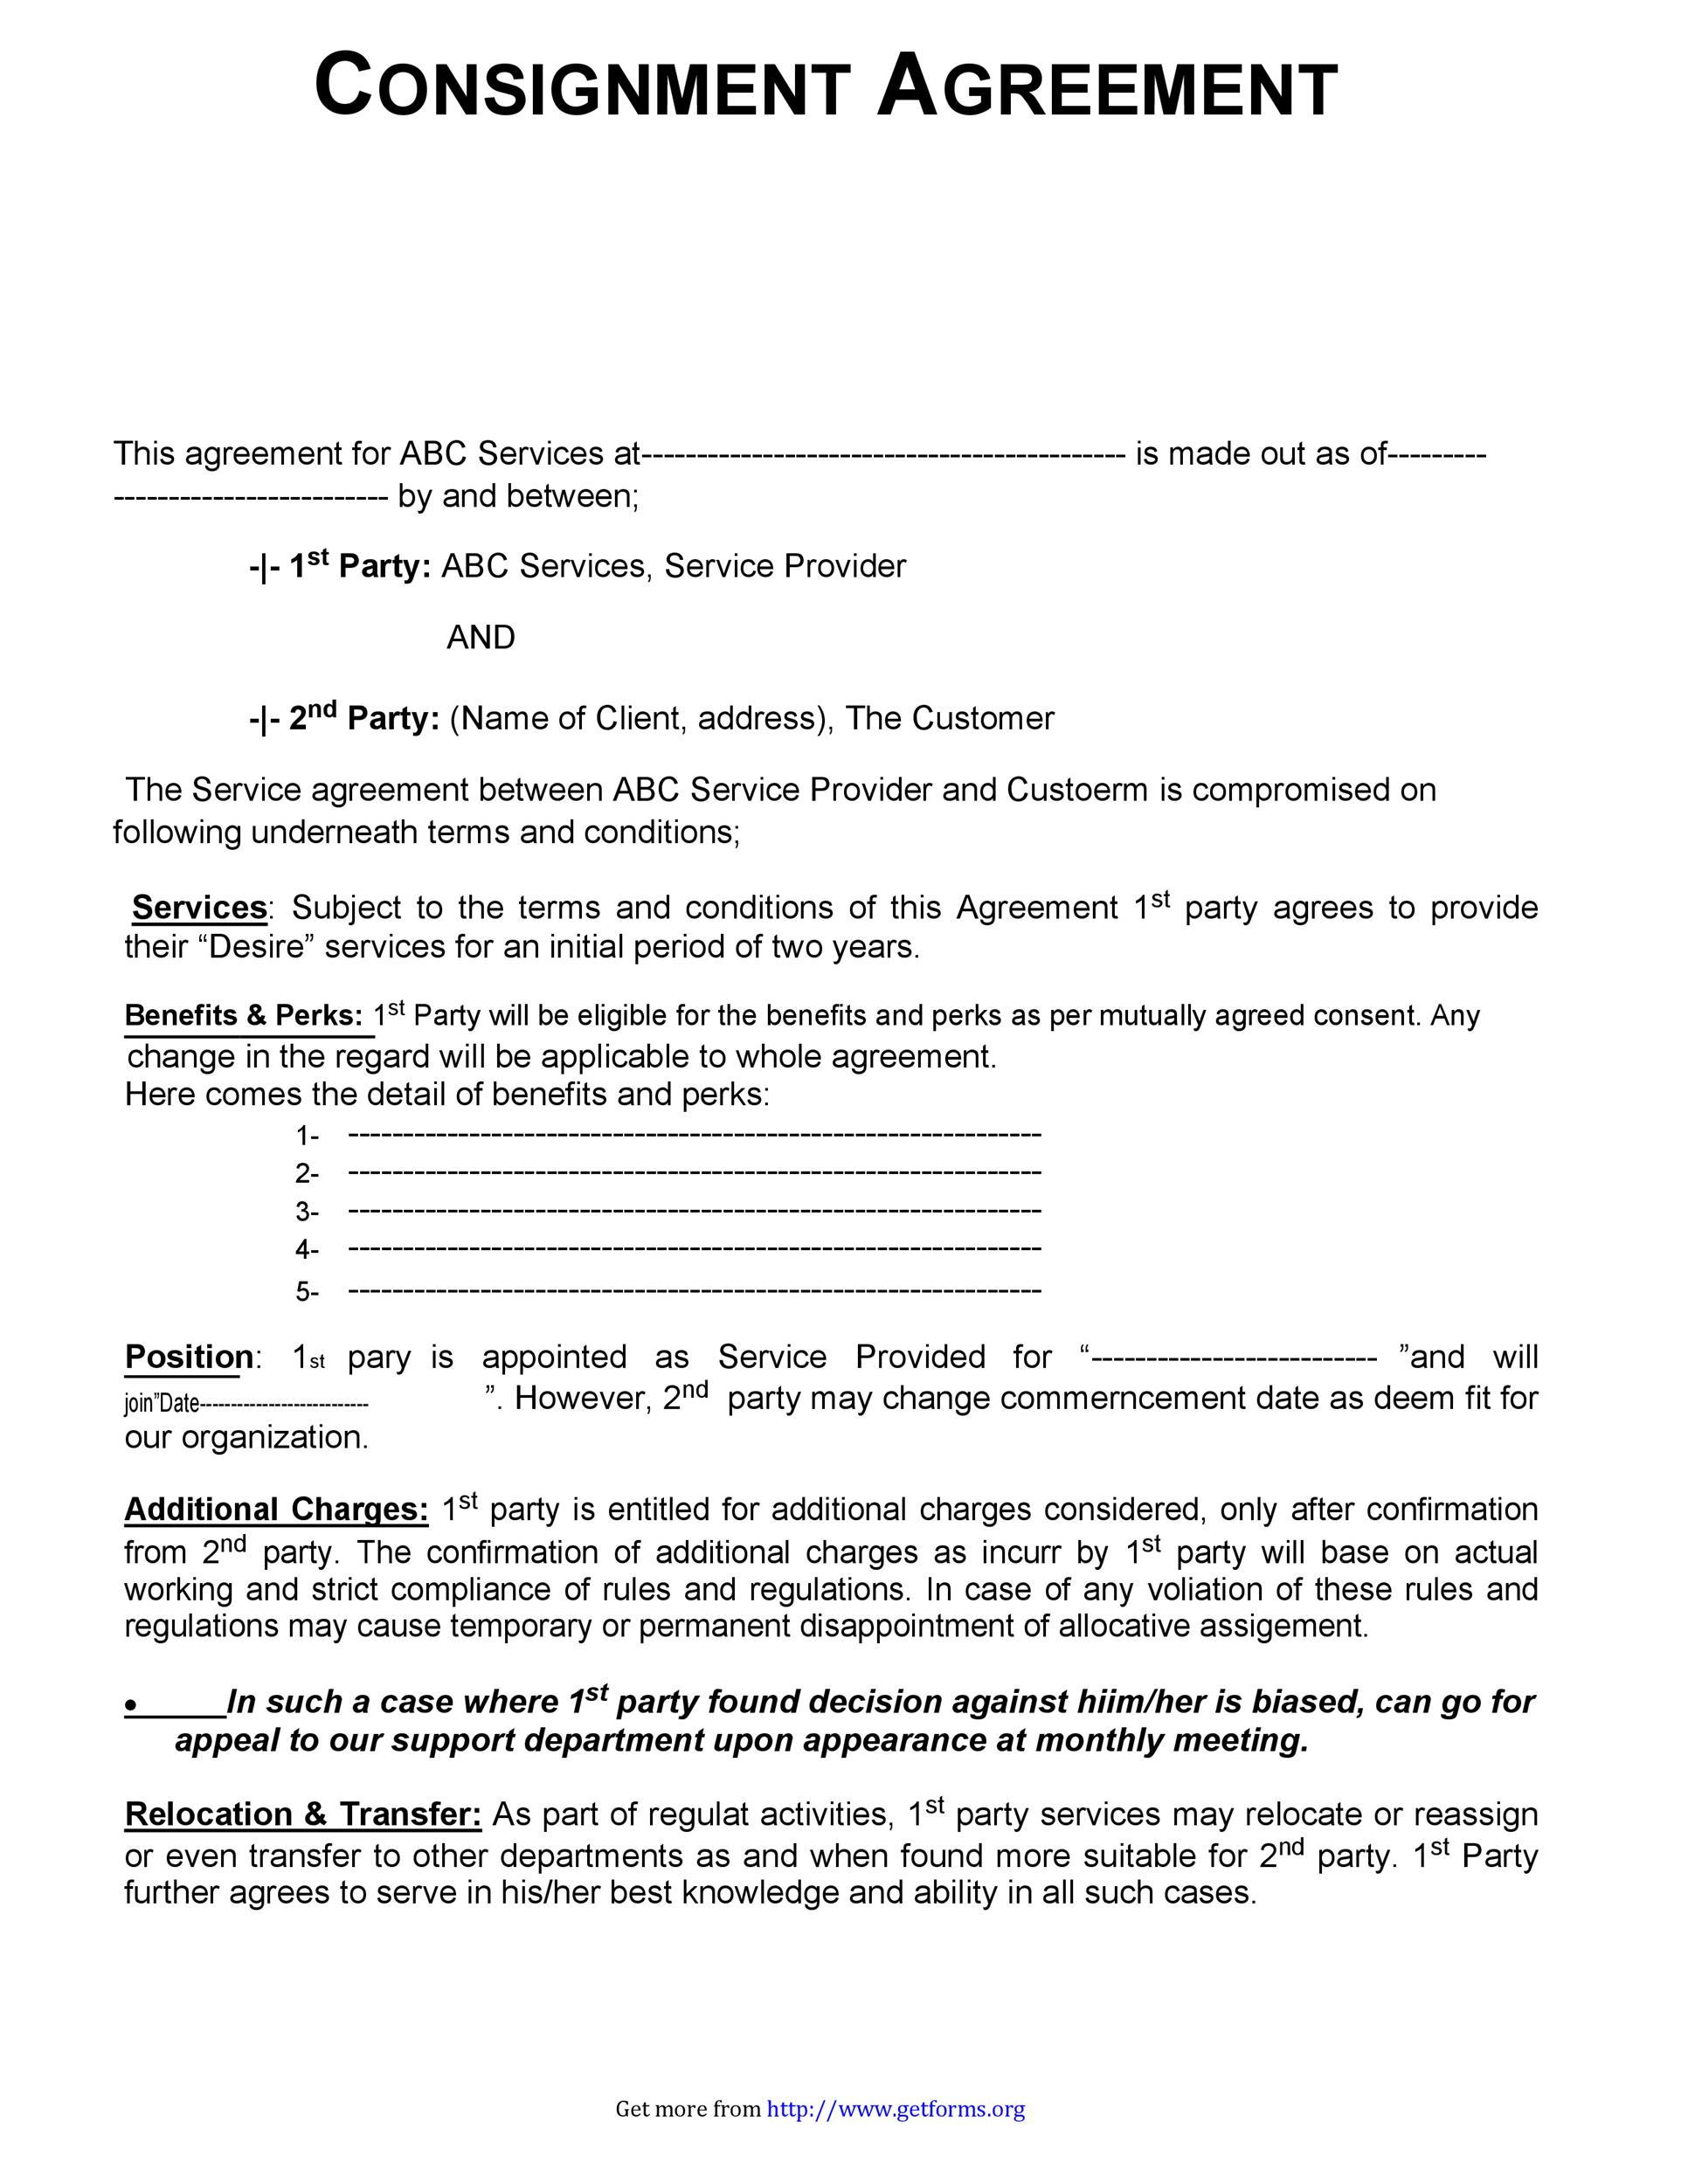 Free Consignment Agreement Template 09